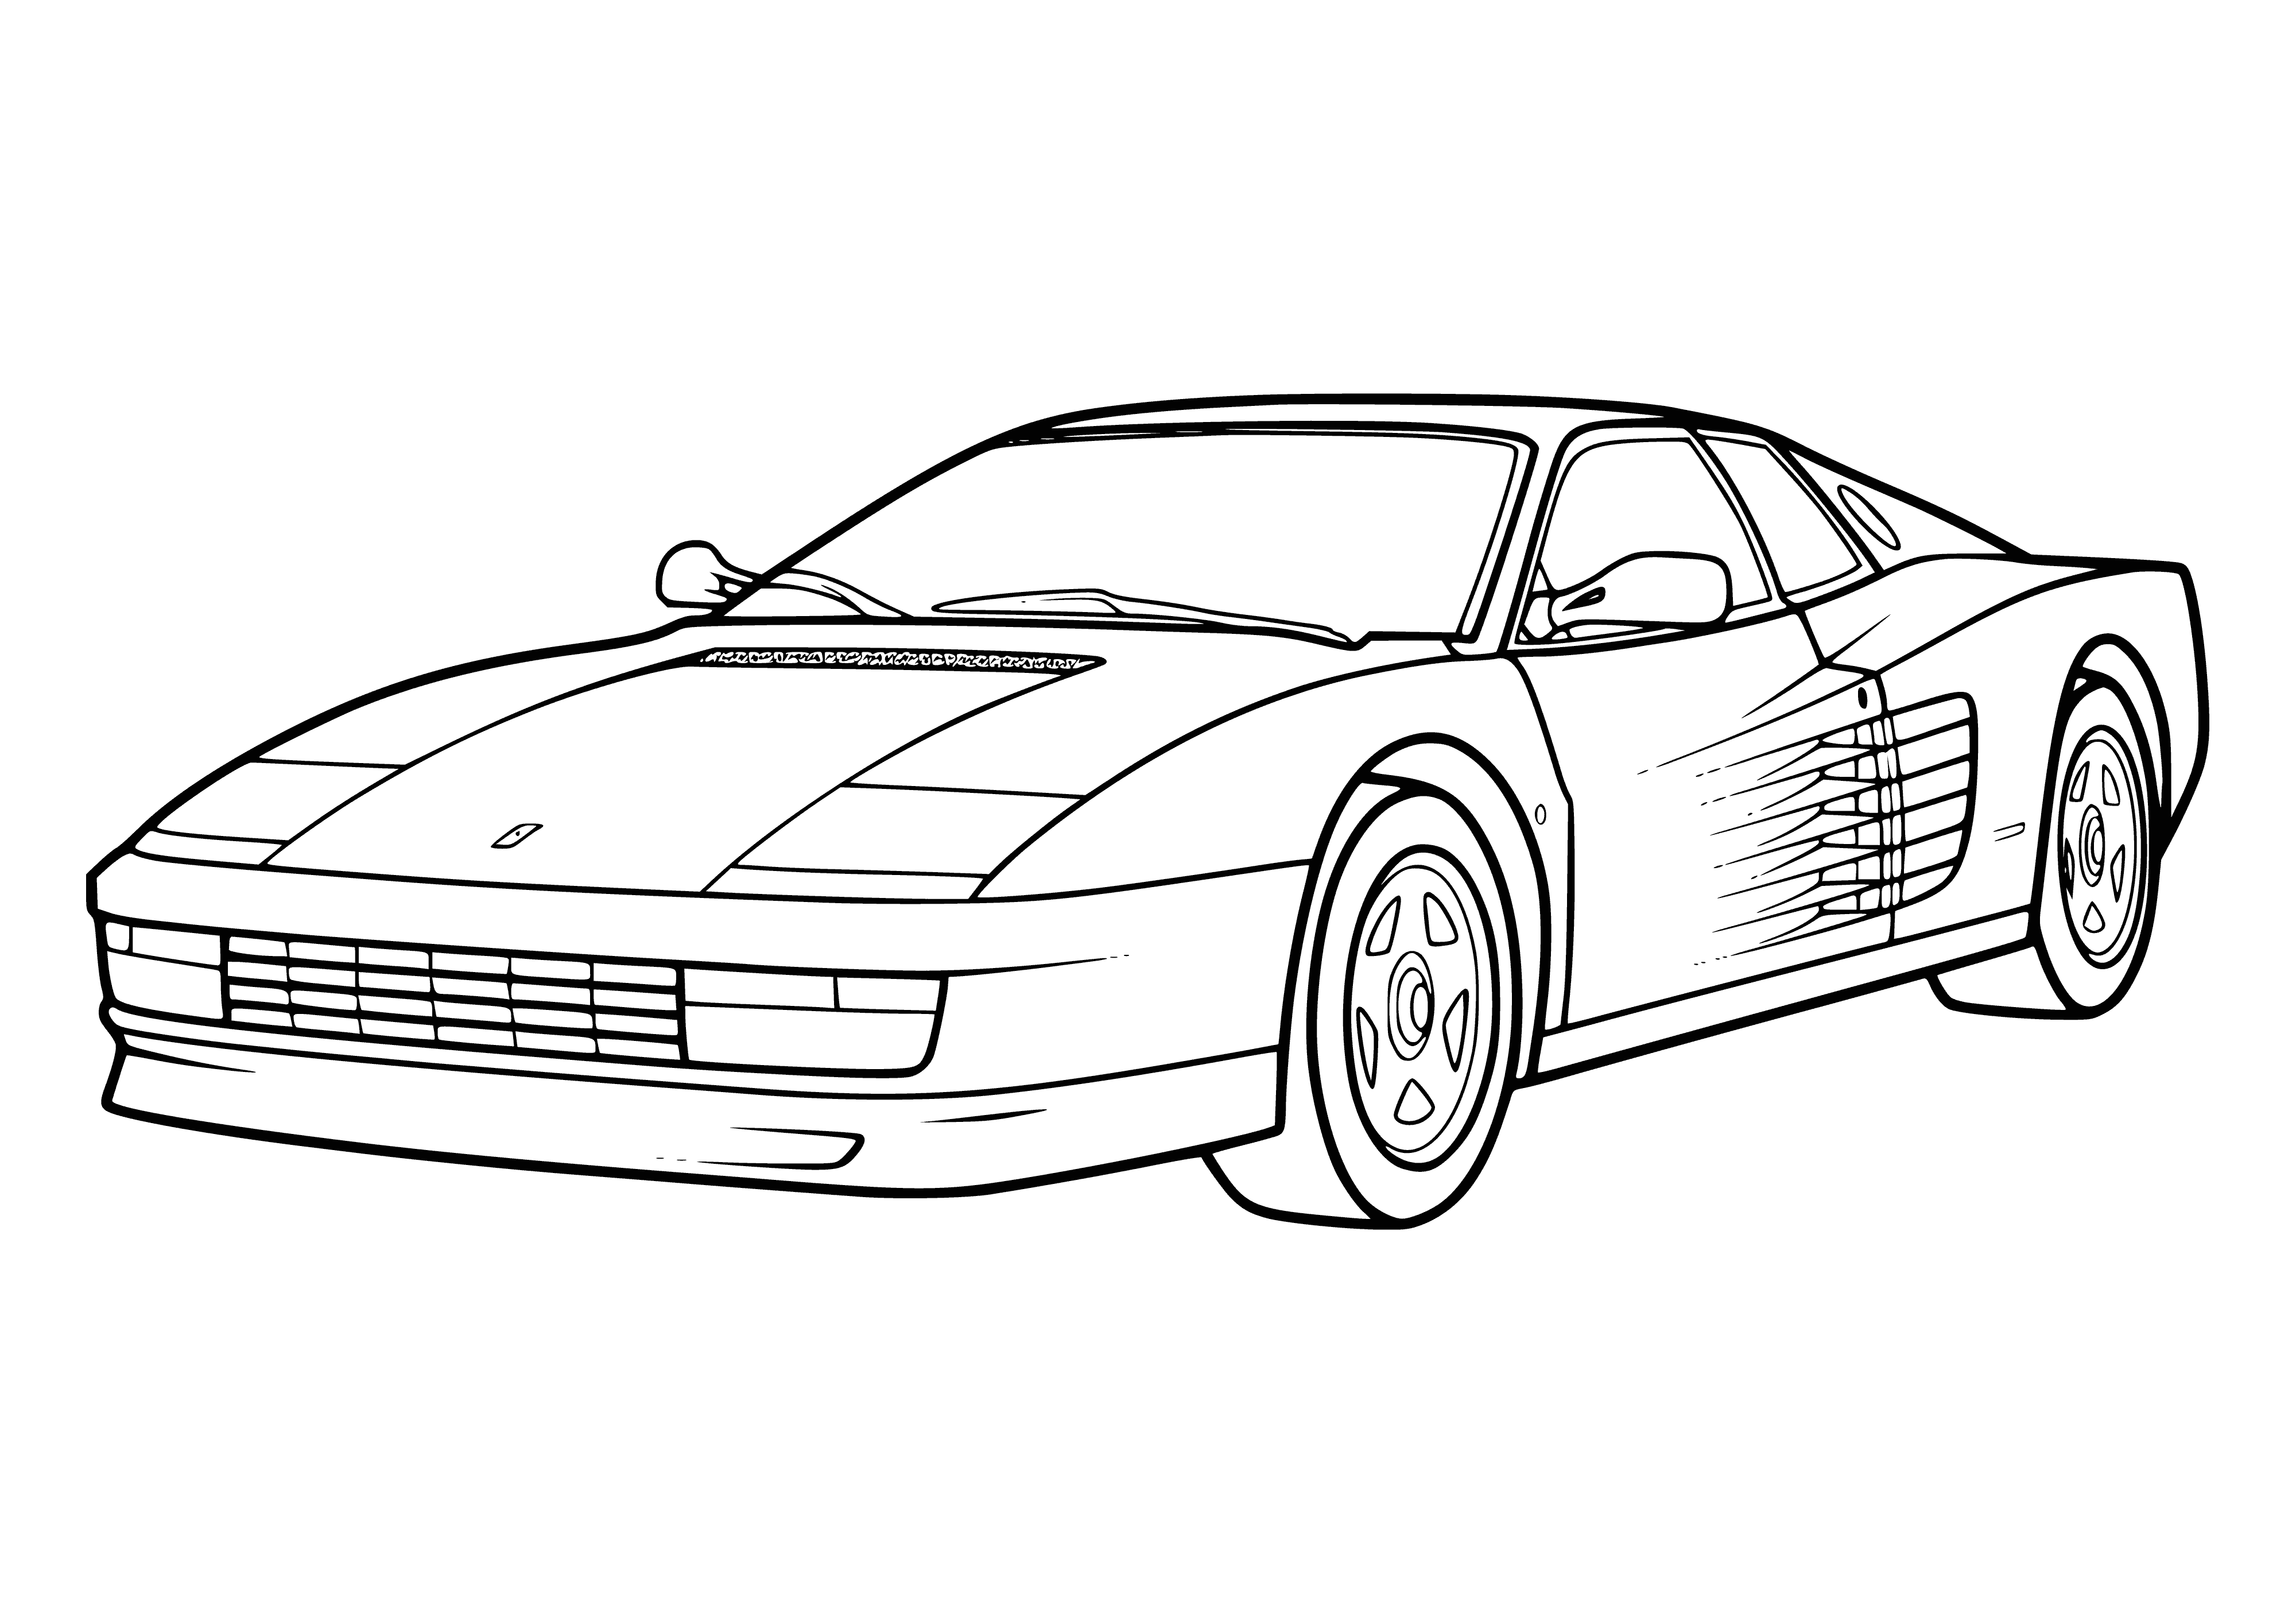 coloring page: Coloring page of dark blue passenger car w/4 doors & windows, rounded front & back, 2 headlights & 2 taillights, spoiler. Parked on cement roadway.